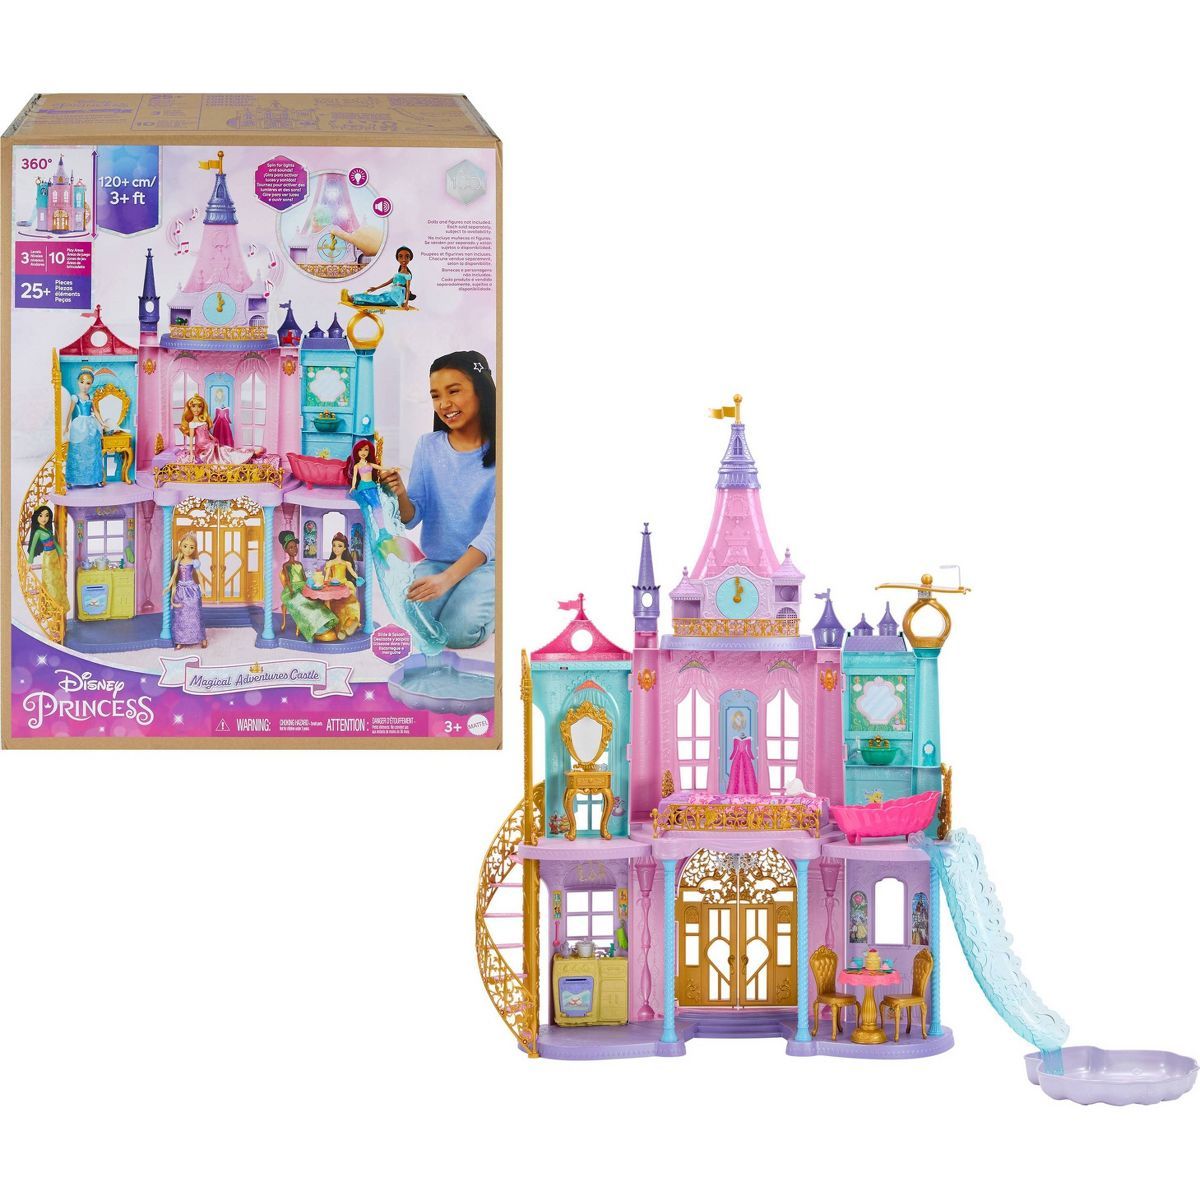 Disney Princess Magical Adventures Castle 4 ft Tall with Lights & Sounds | Target